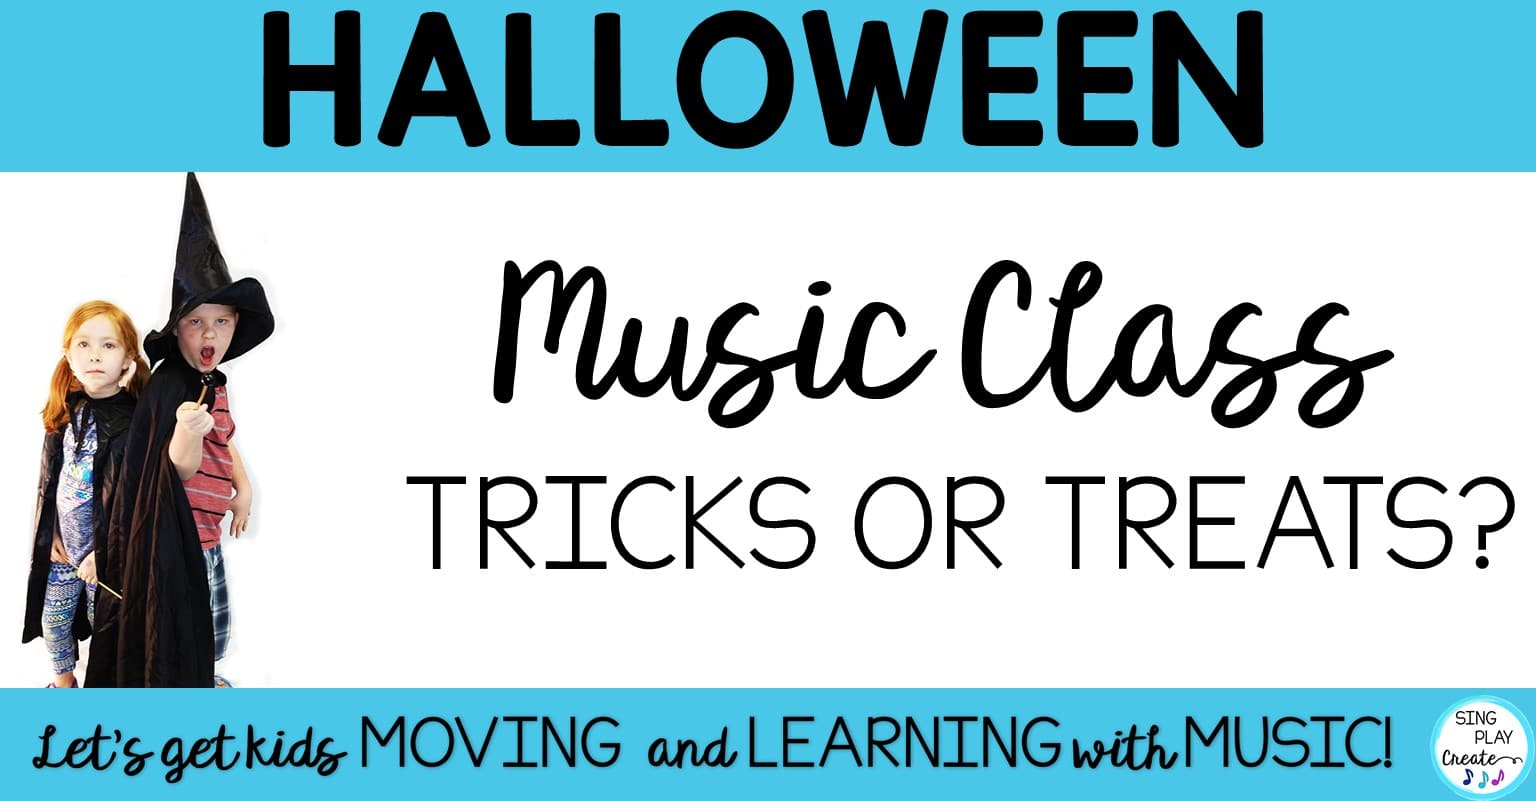 You are currently viewing Halloween Music Class Tricks or Treats?